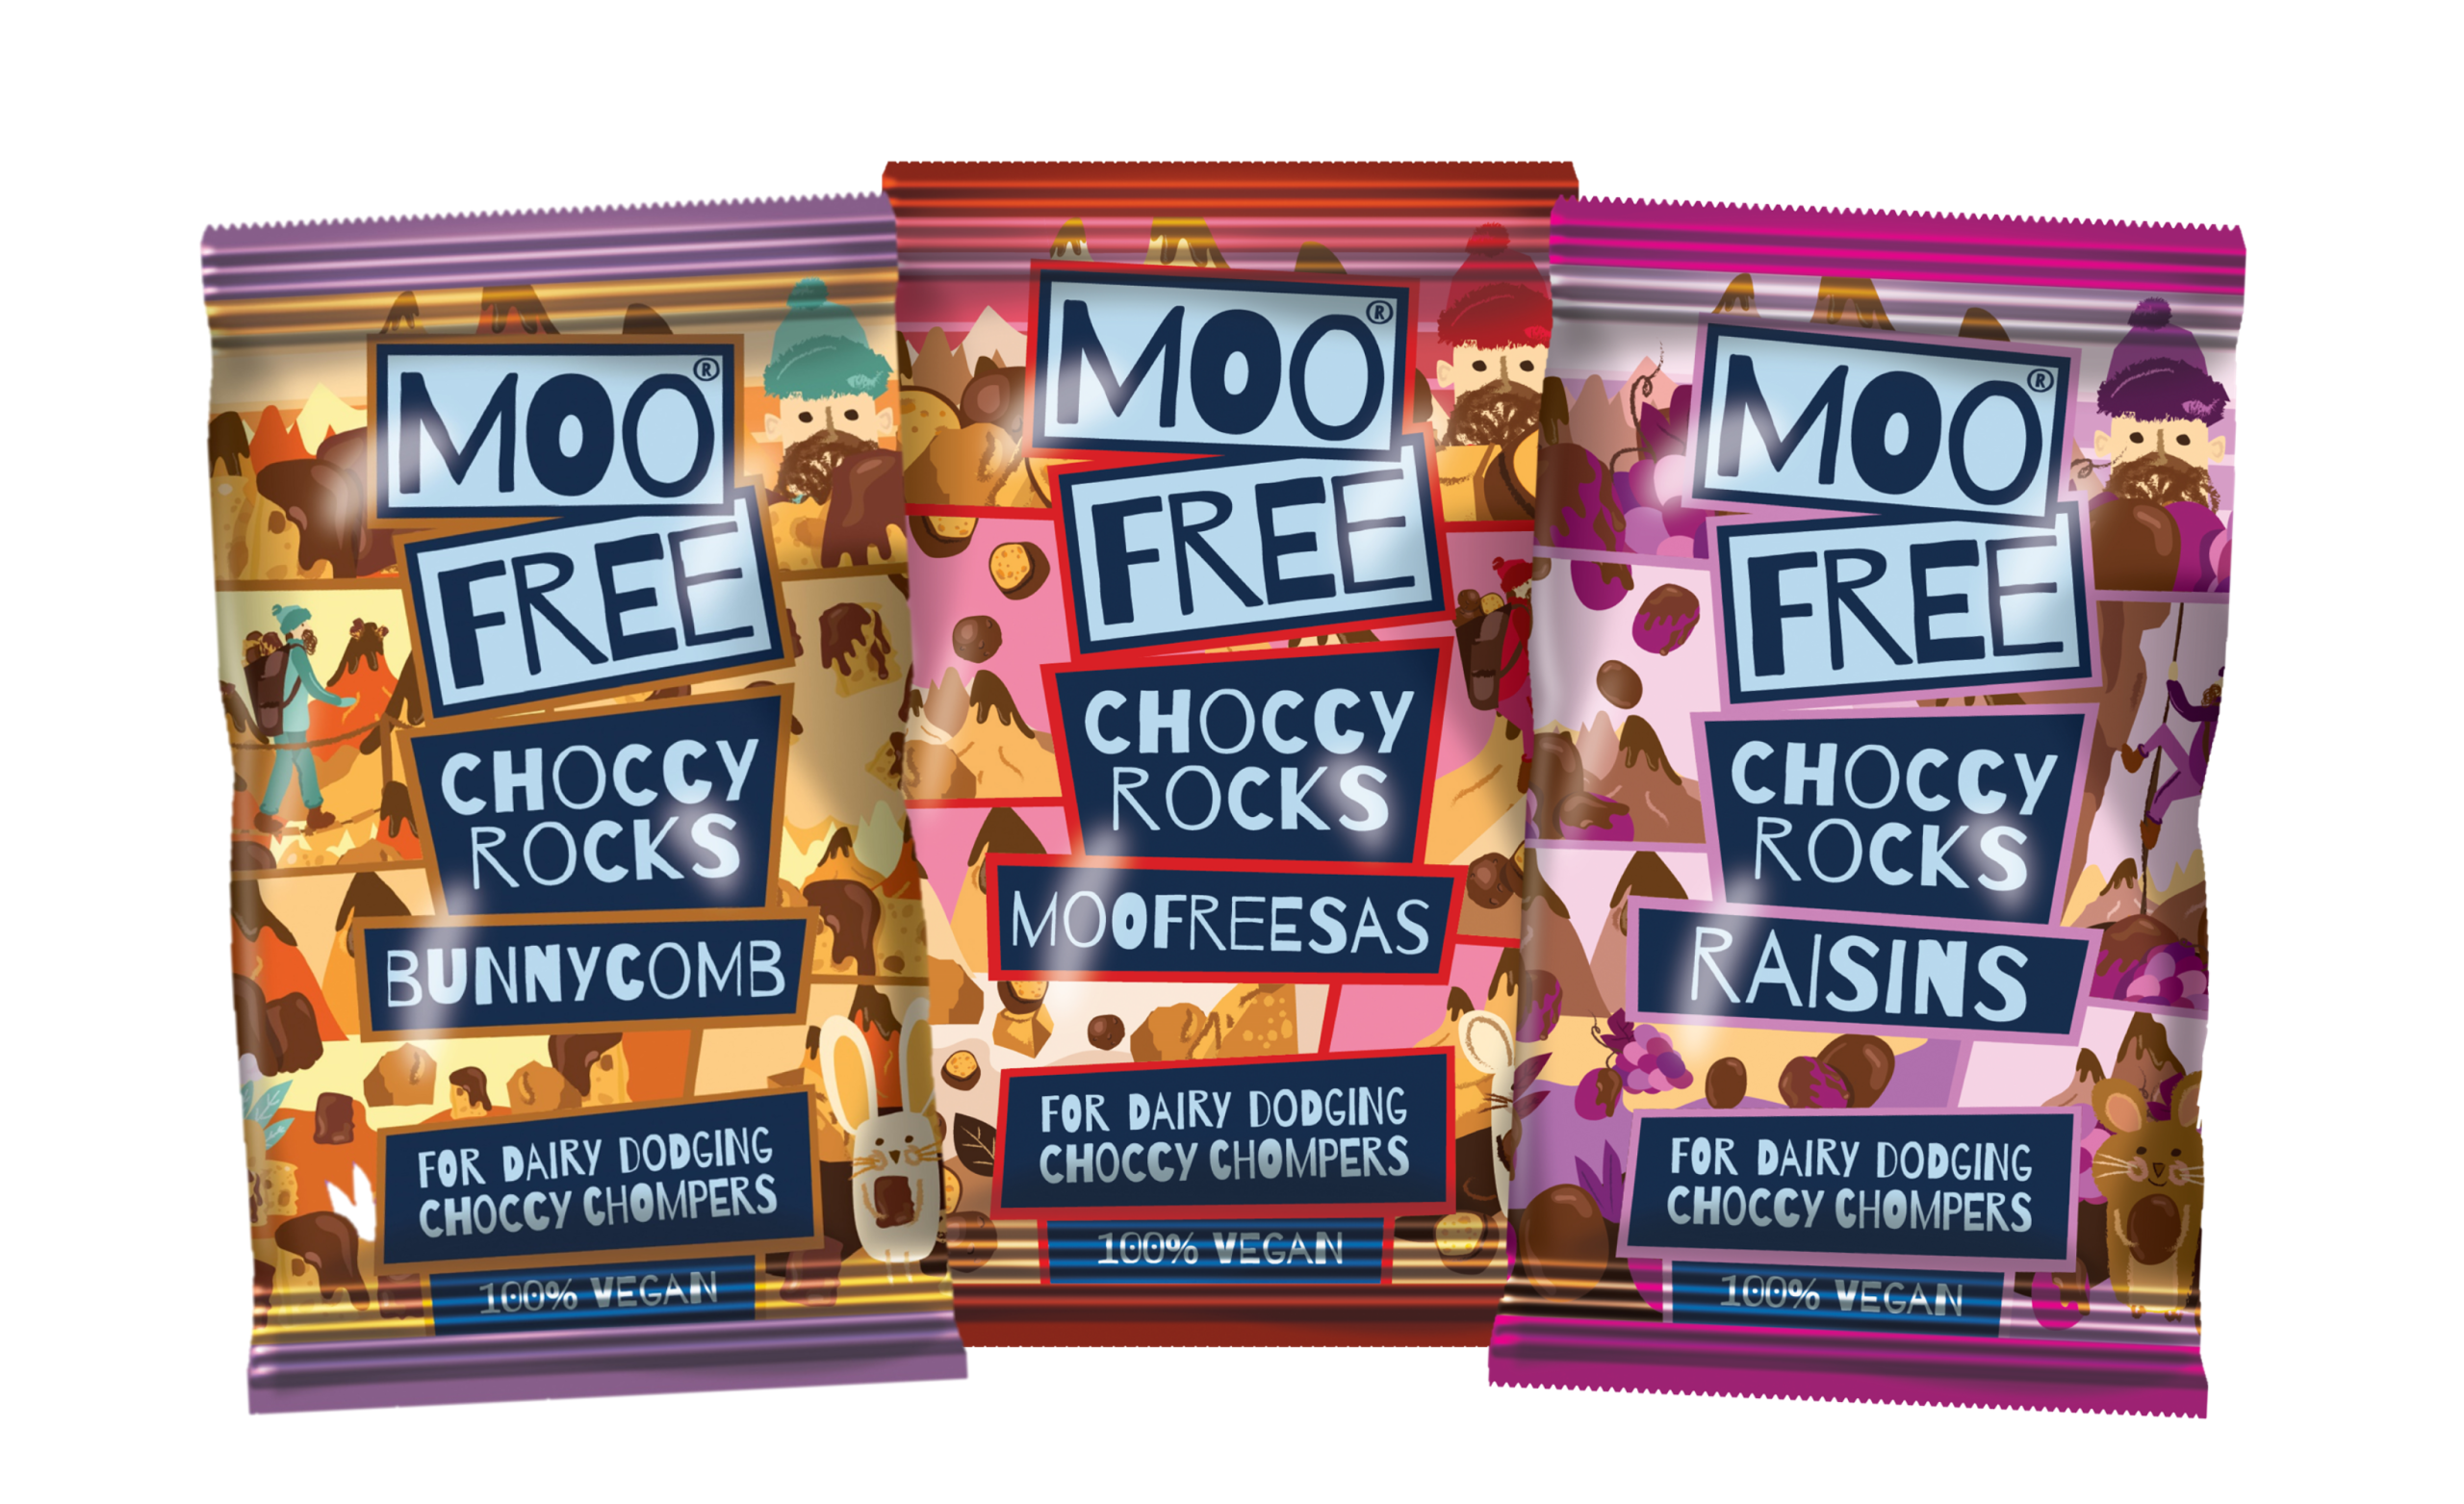 Moo Free Invests in New Machinery to Craft Three New Products